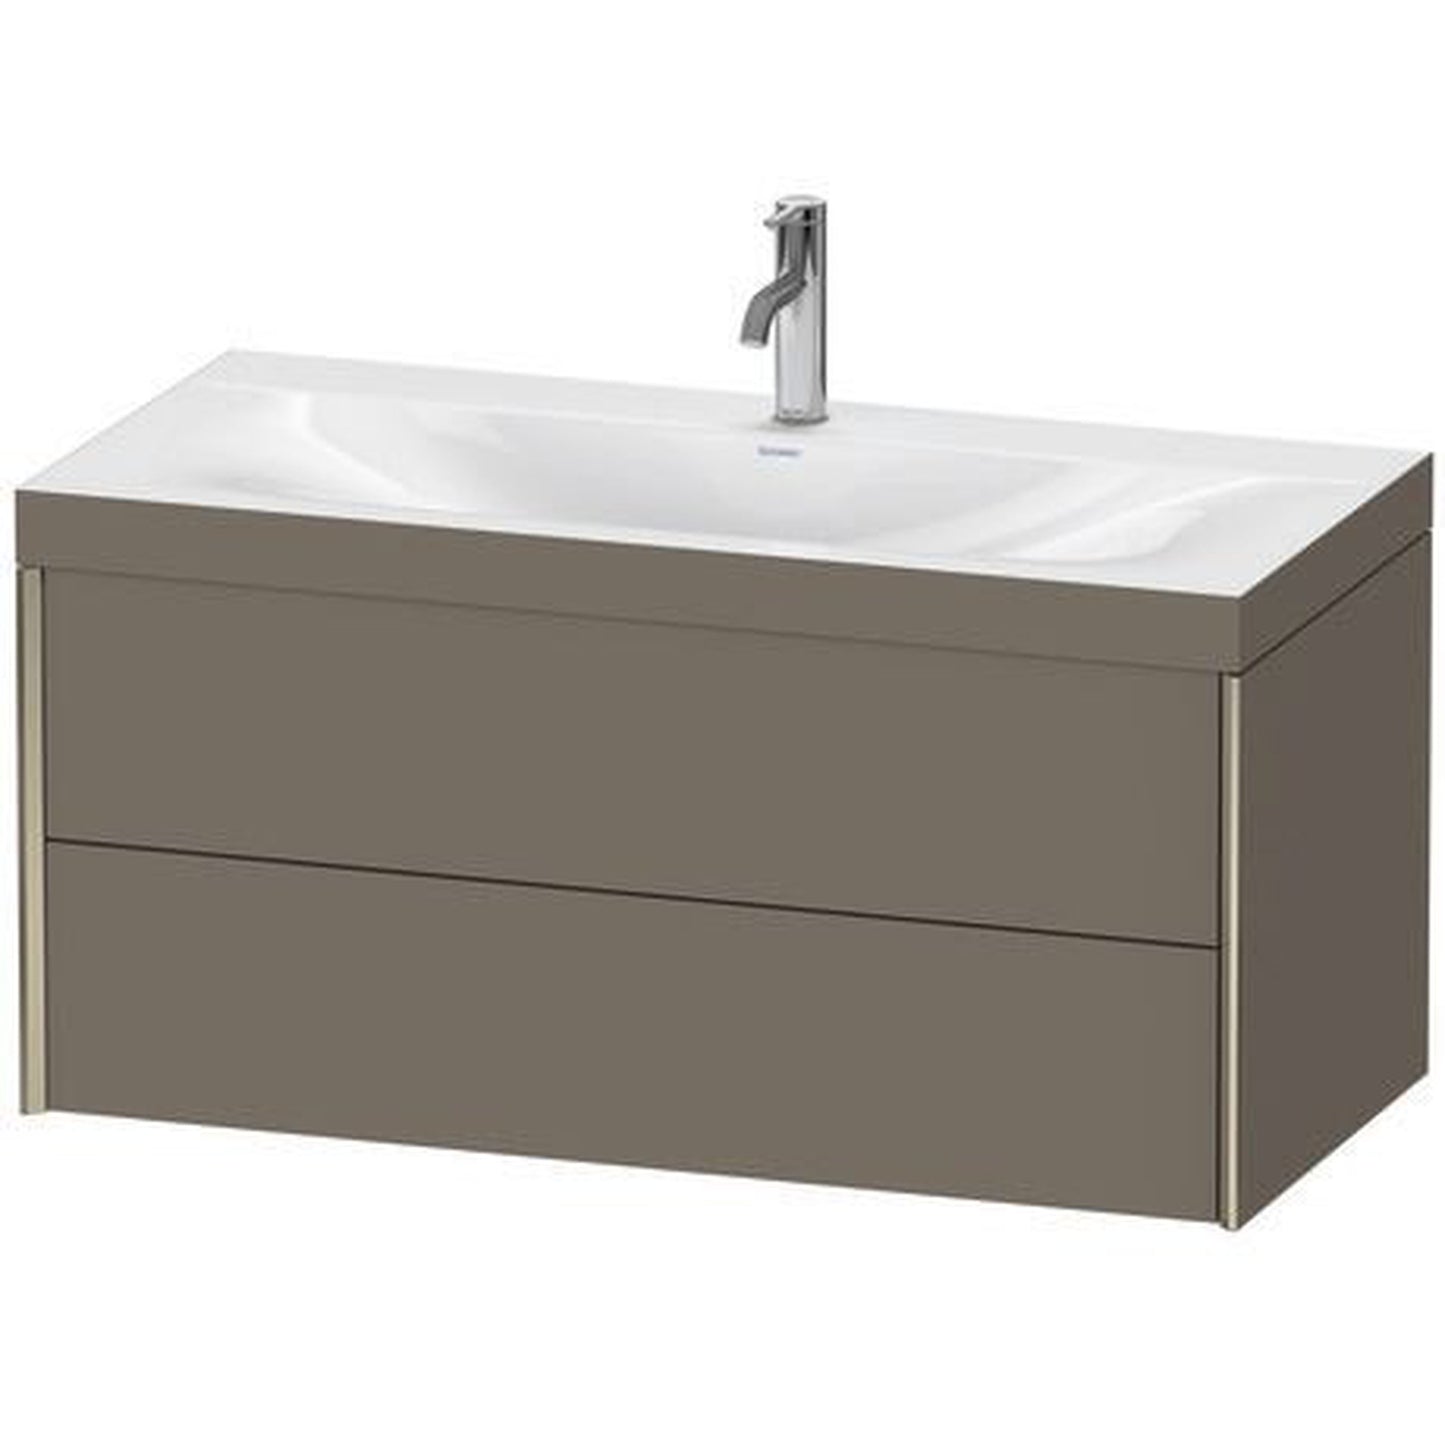 Duravit Xviu 39" x 20" x 19" Two Drawer C-Bonded Wall-Mount Vanity Kit With One Tap Hole, Flannel Gray (XV4616OB190C)